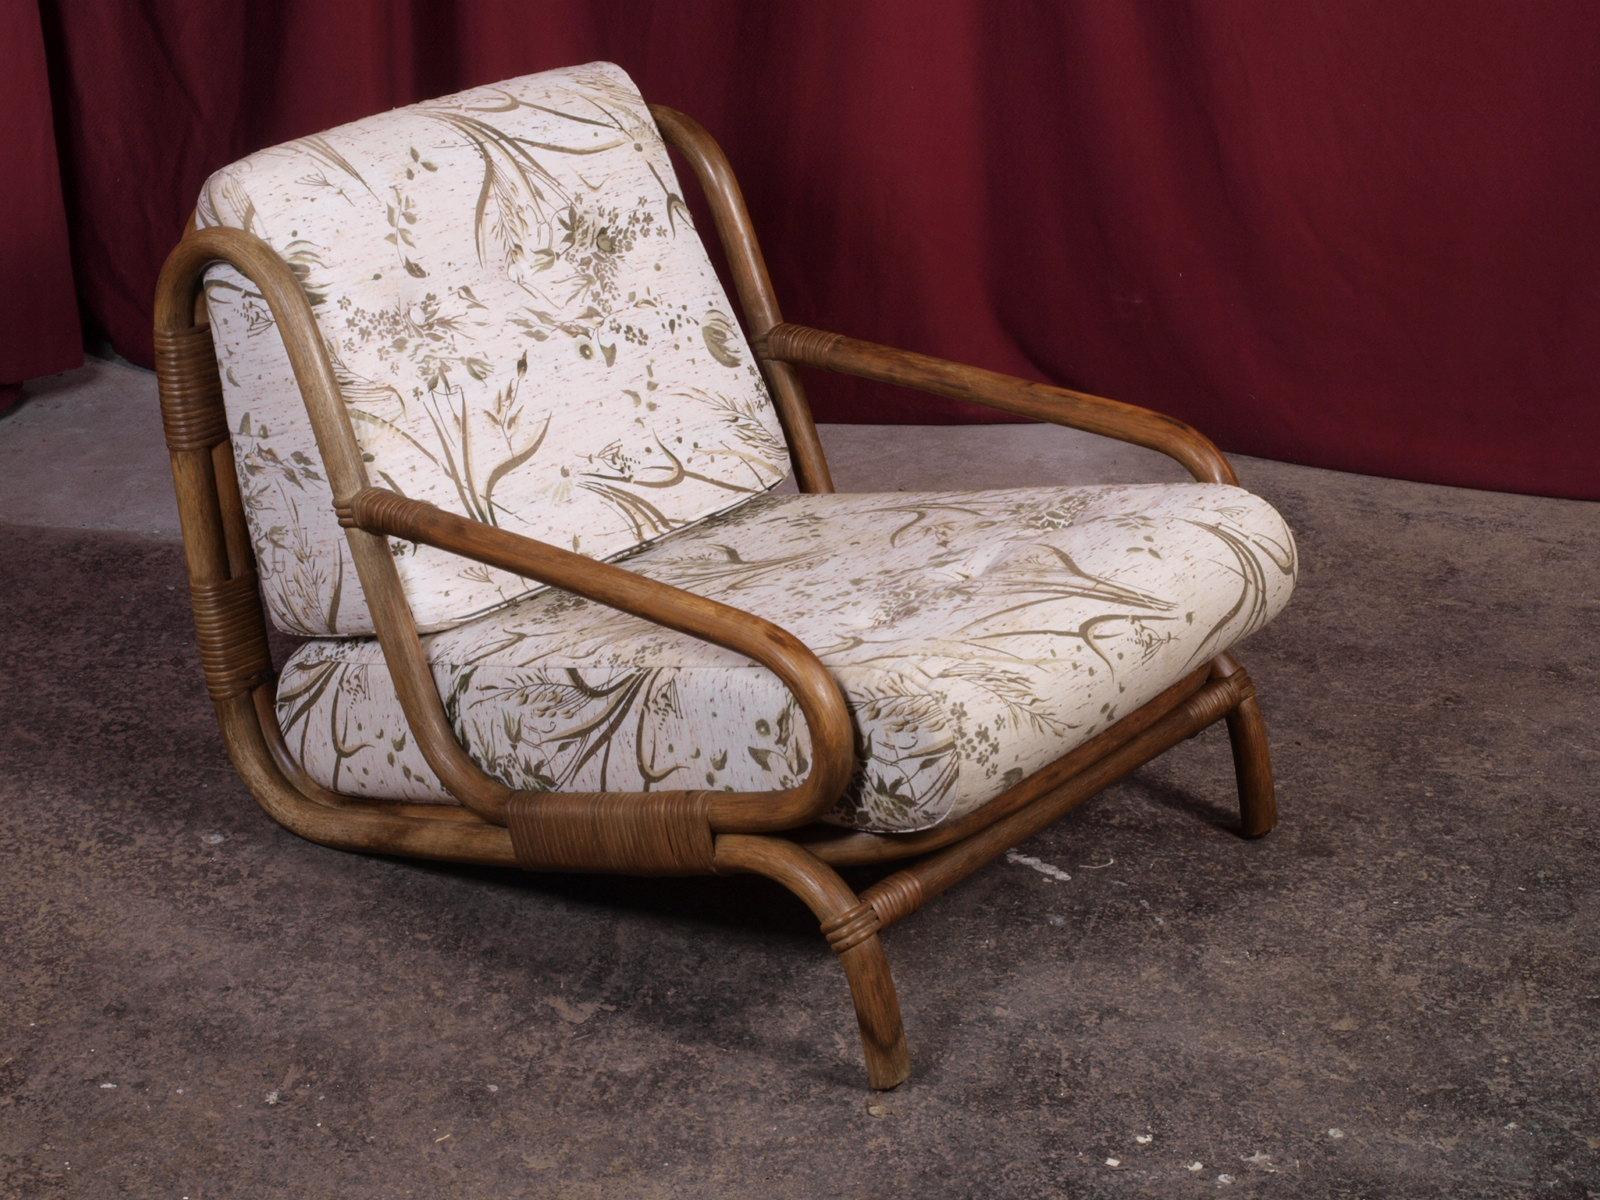 Excellent condition rattan lounge chair with rare well-preserved cane bindings, showcasing lovely curved legs and a smooth entry. Its inviting comfort tempts you to unwind for a drink or a sunlit nap. The enduring fabric and organic form promise